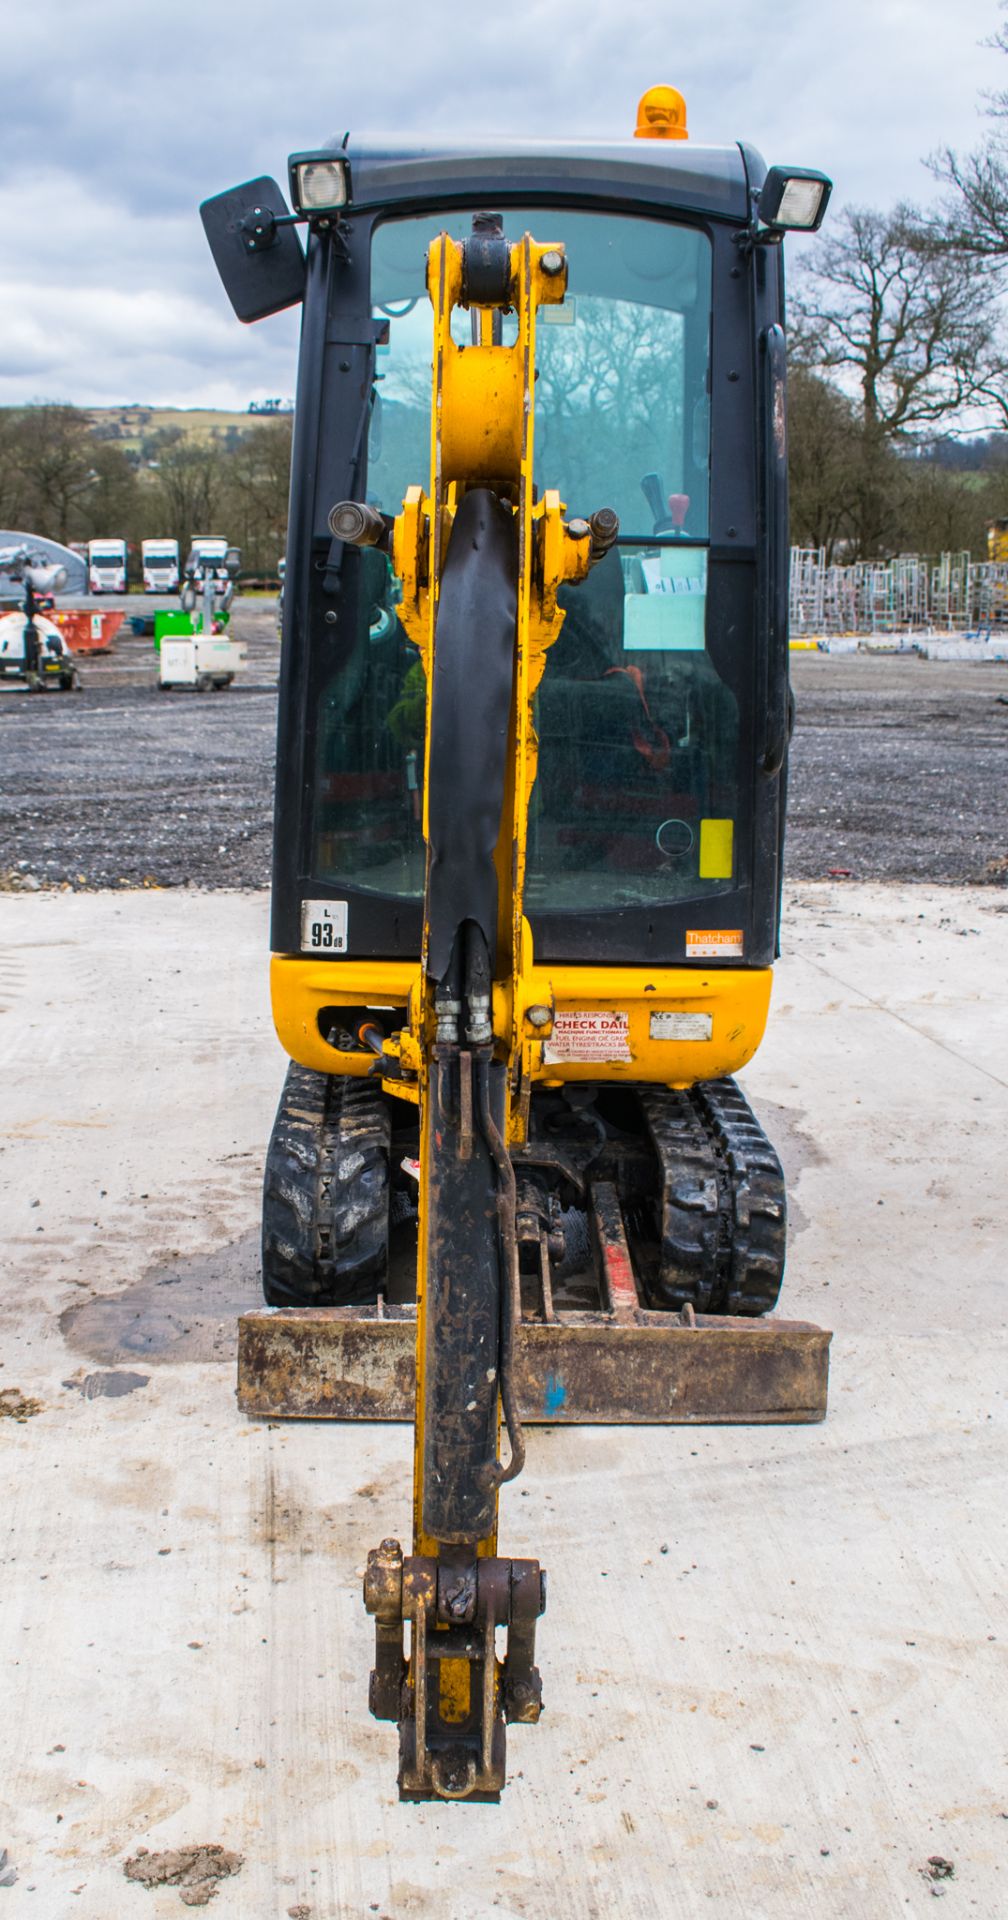 JCB 801.6 1.5 tonne rubber tracked mini excavator Year: 2015 S/N: 2071769 Recorded Hours: 1518 - Image 5 of 17